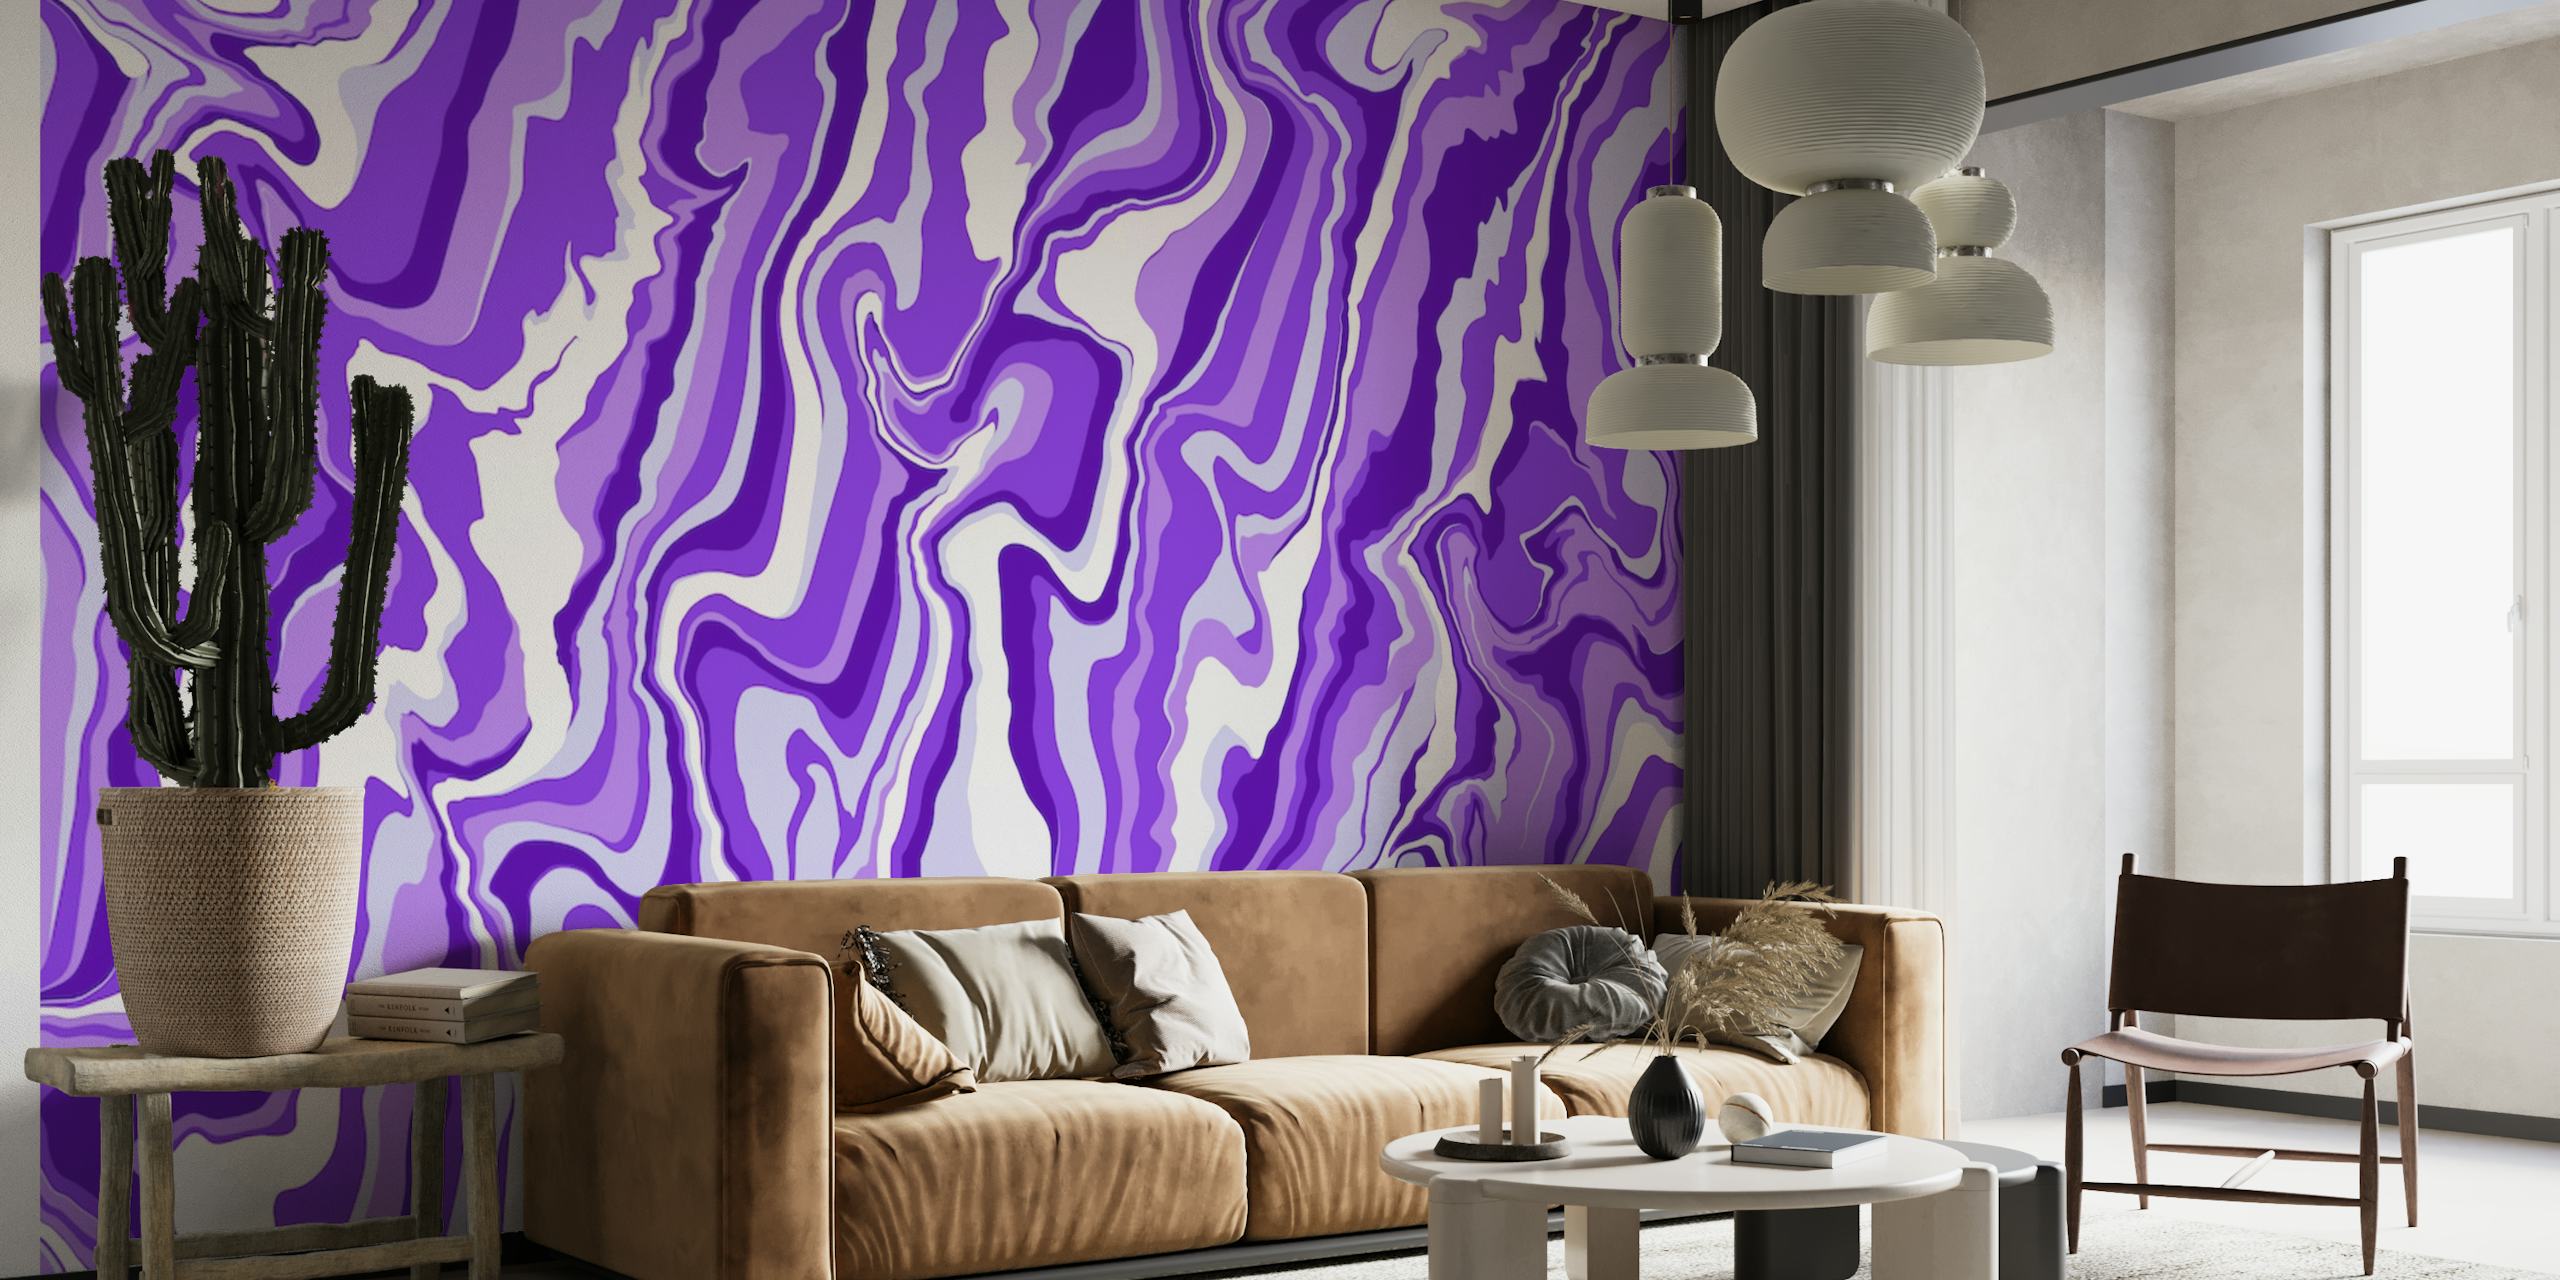 Abstract purple and white fluid art pattern wall mural